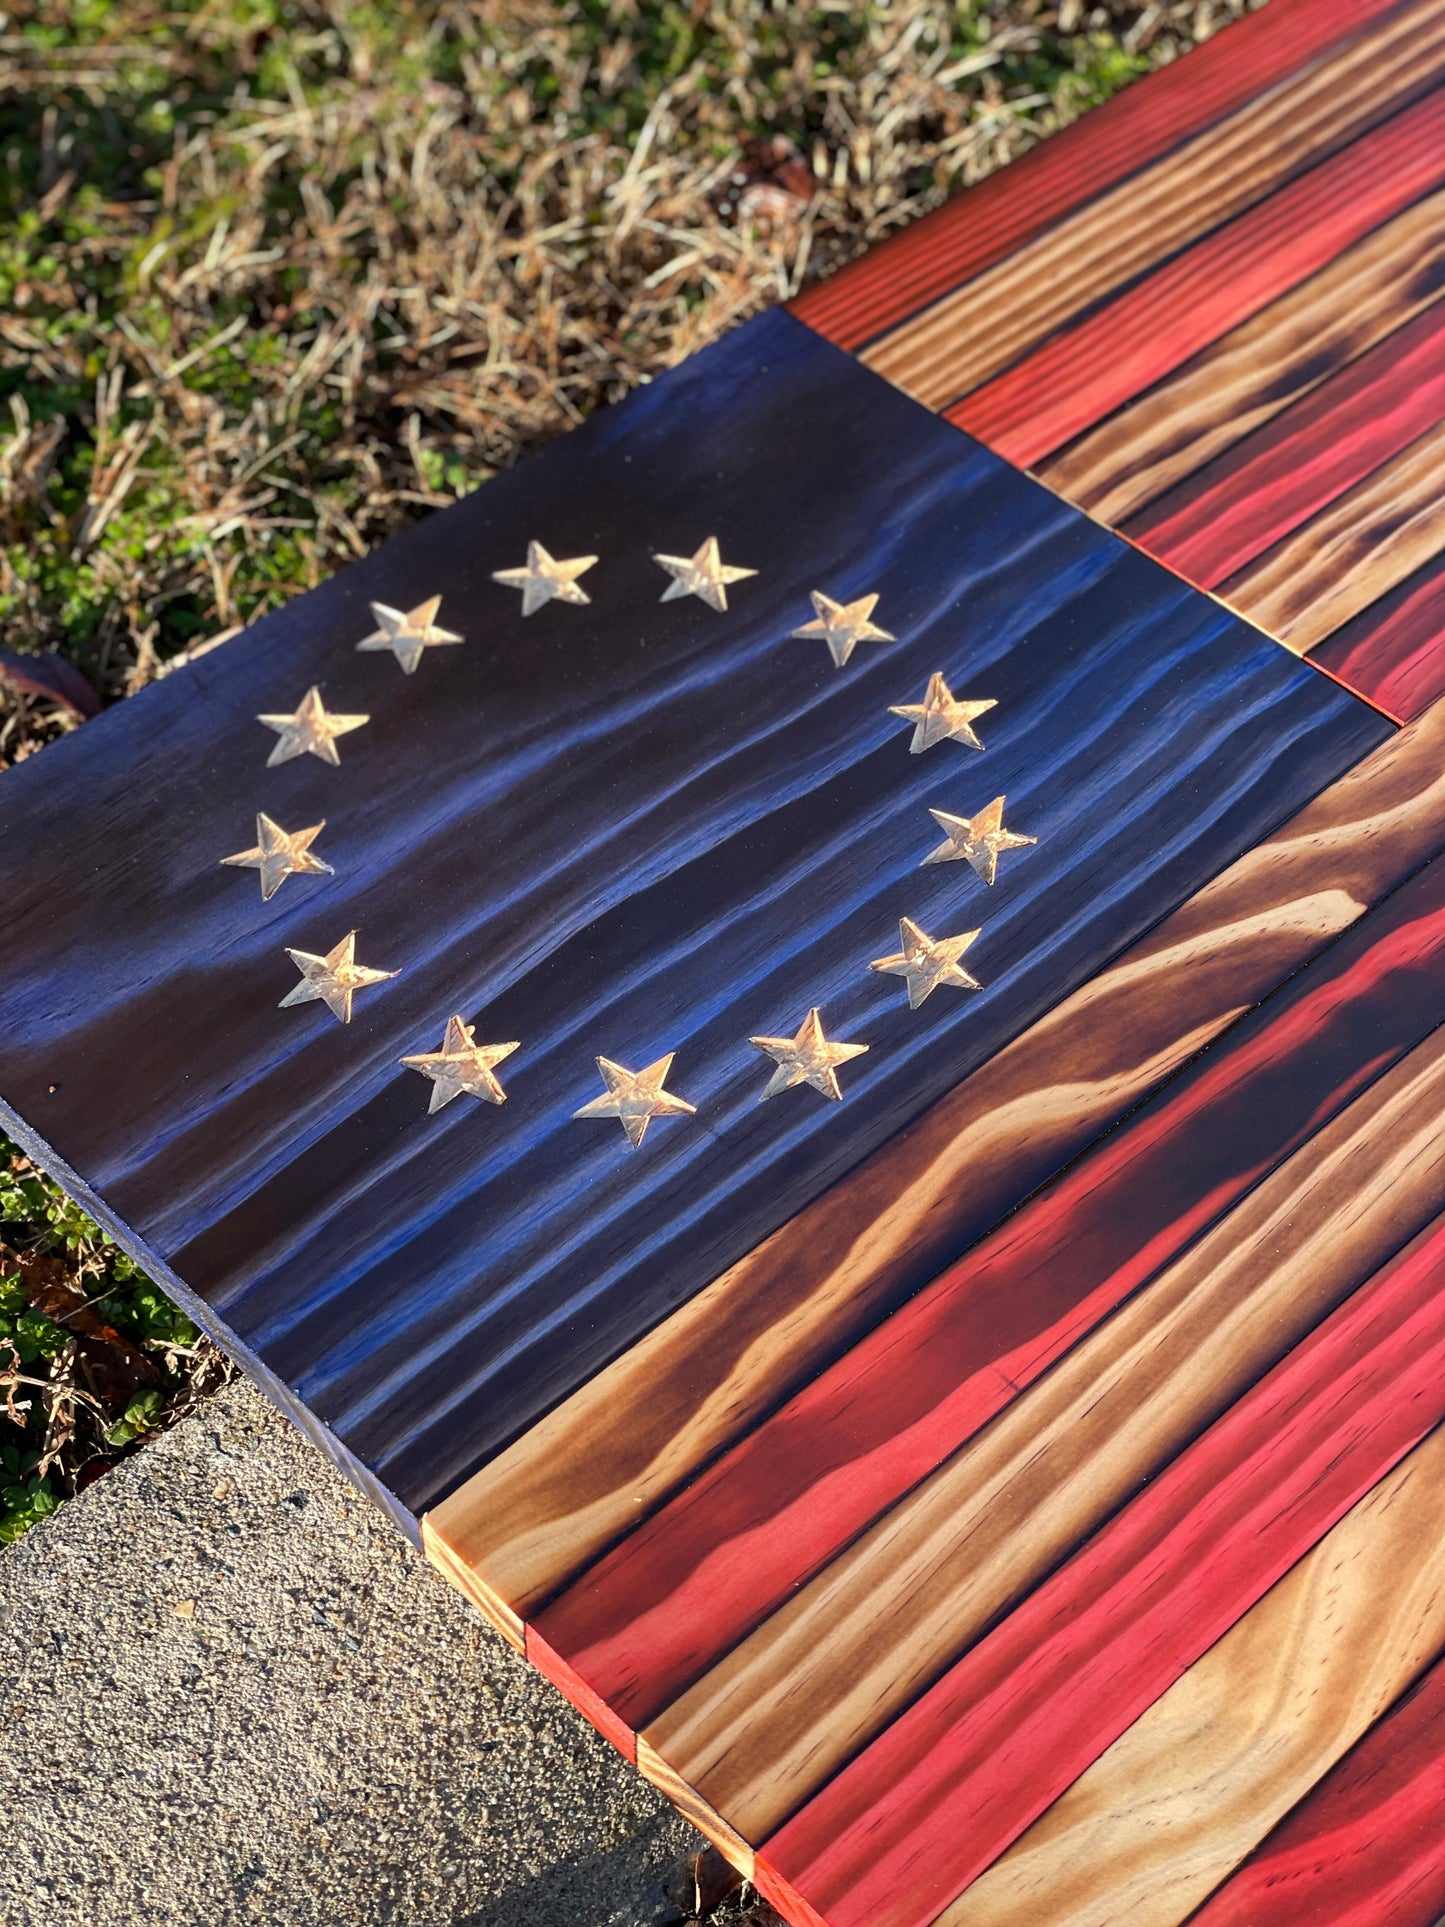 Betsy Ross Wooden American Flag